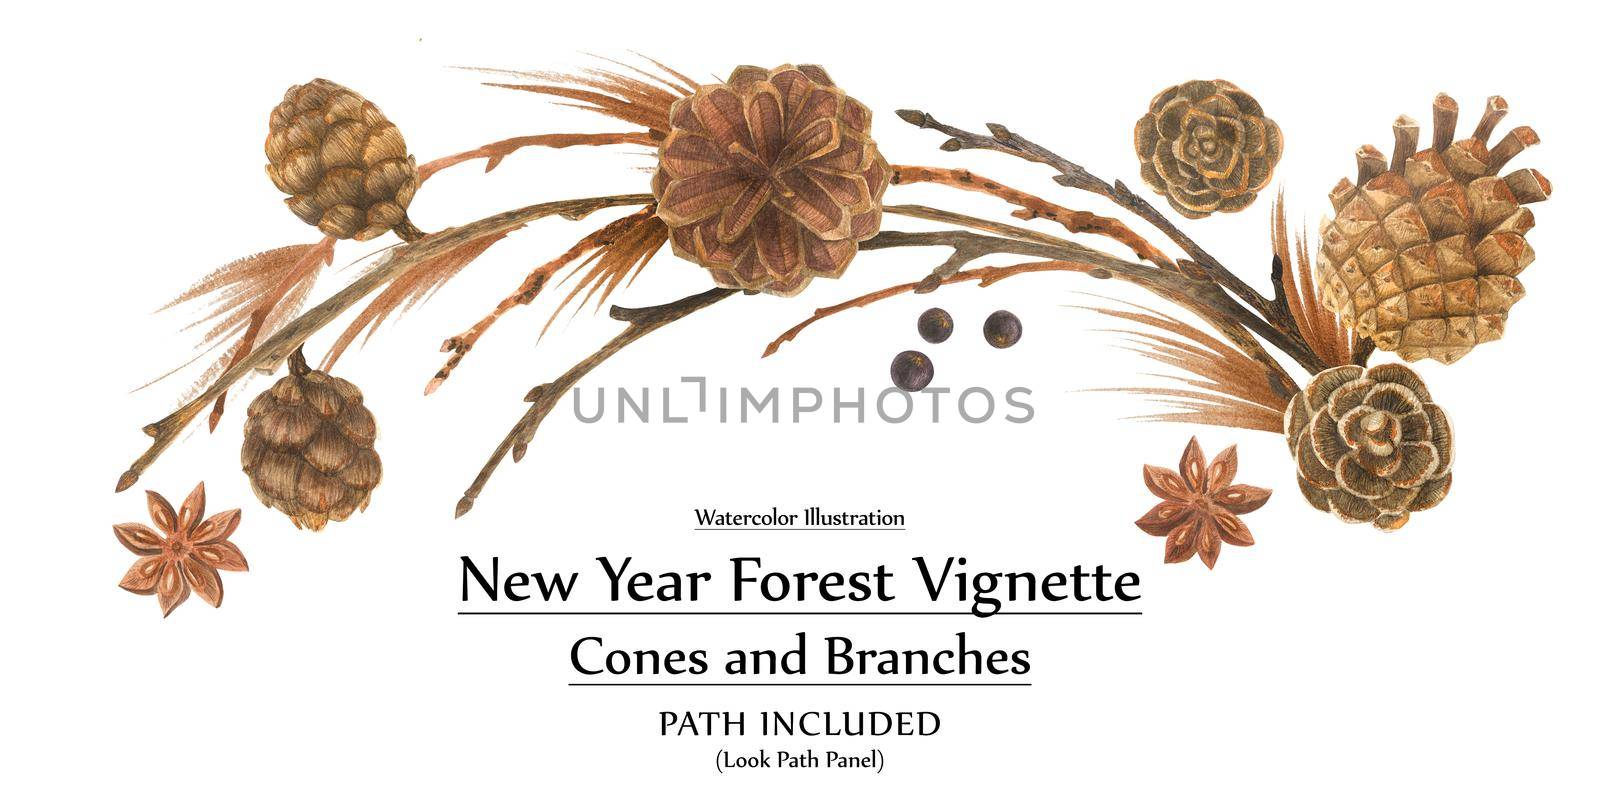 New year design by watercolor. Cones and branches forest vignette. Isolated, path included